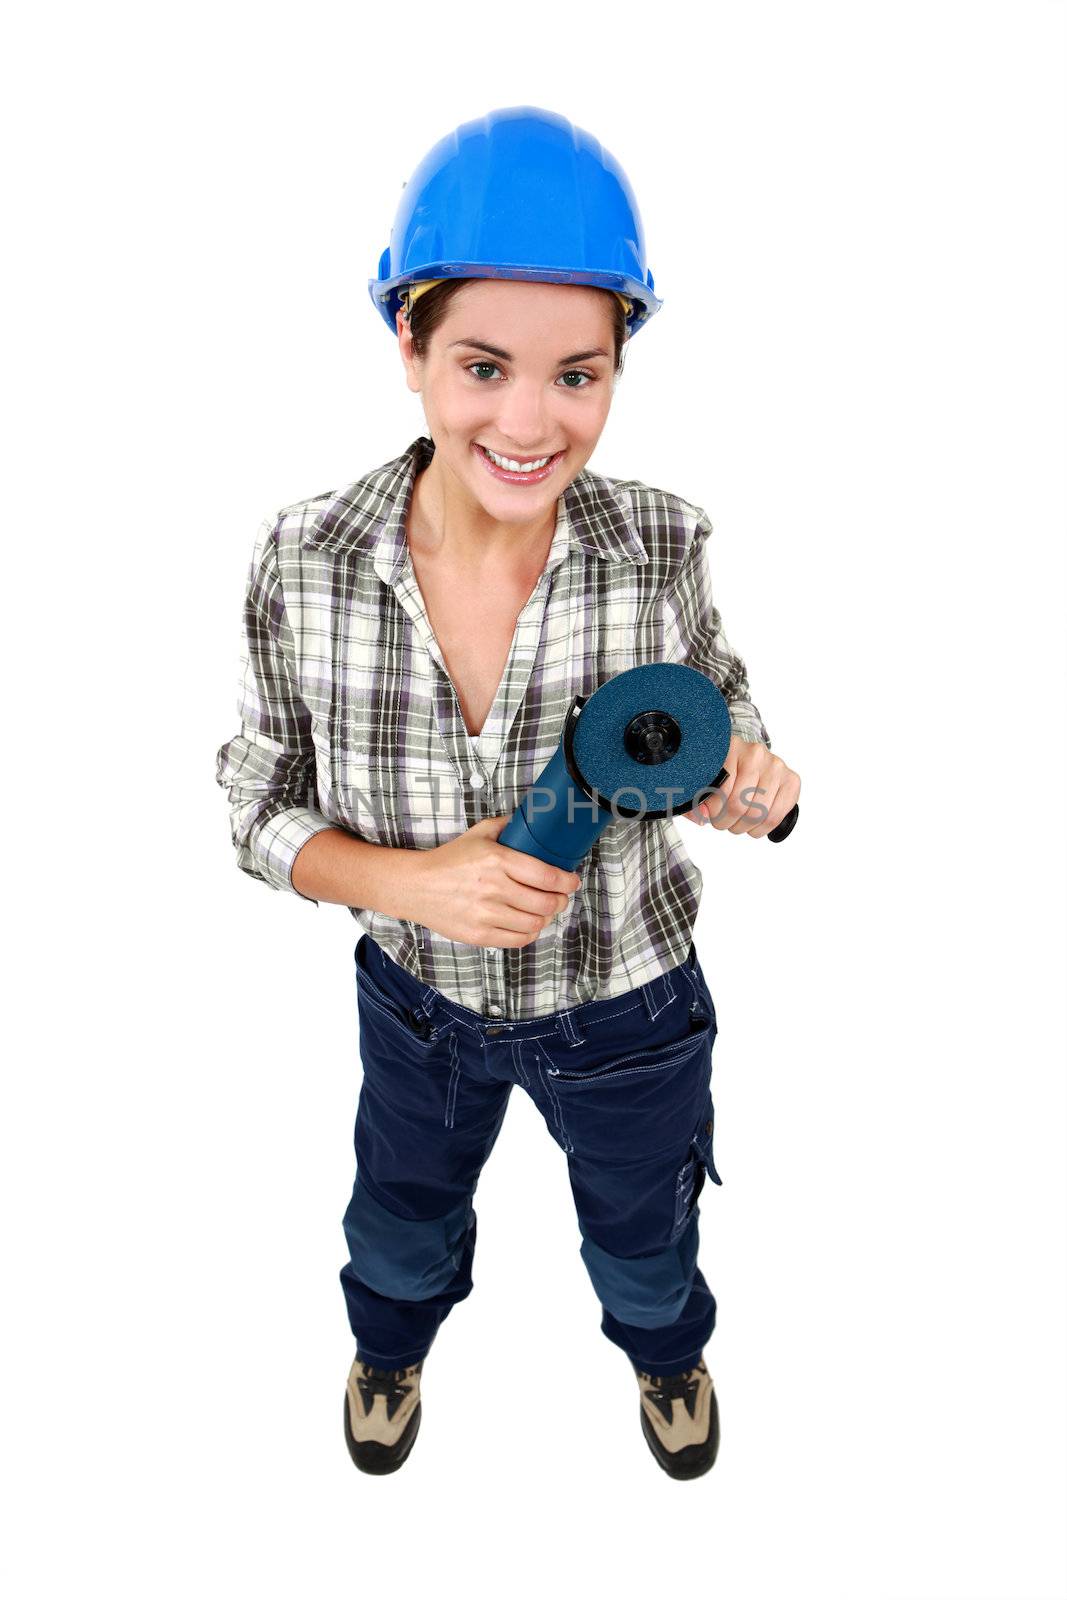 Handywoman with disc grinder by phovoir